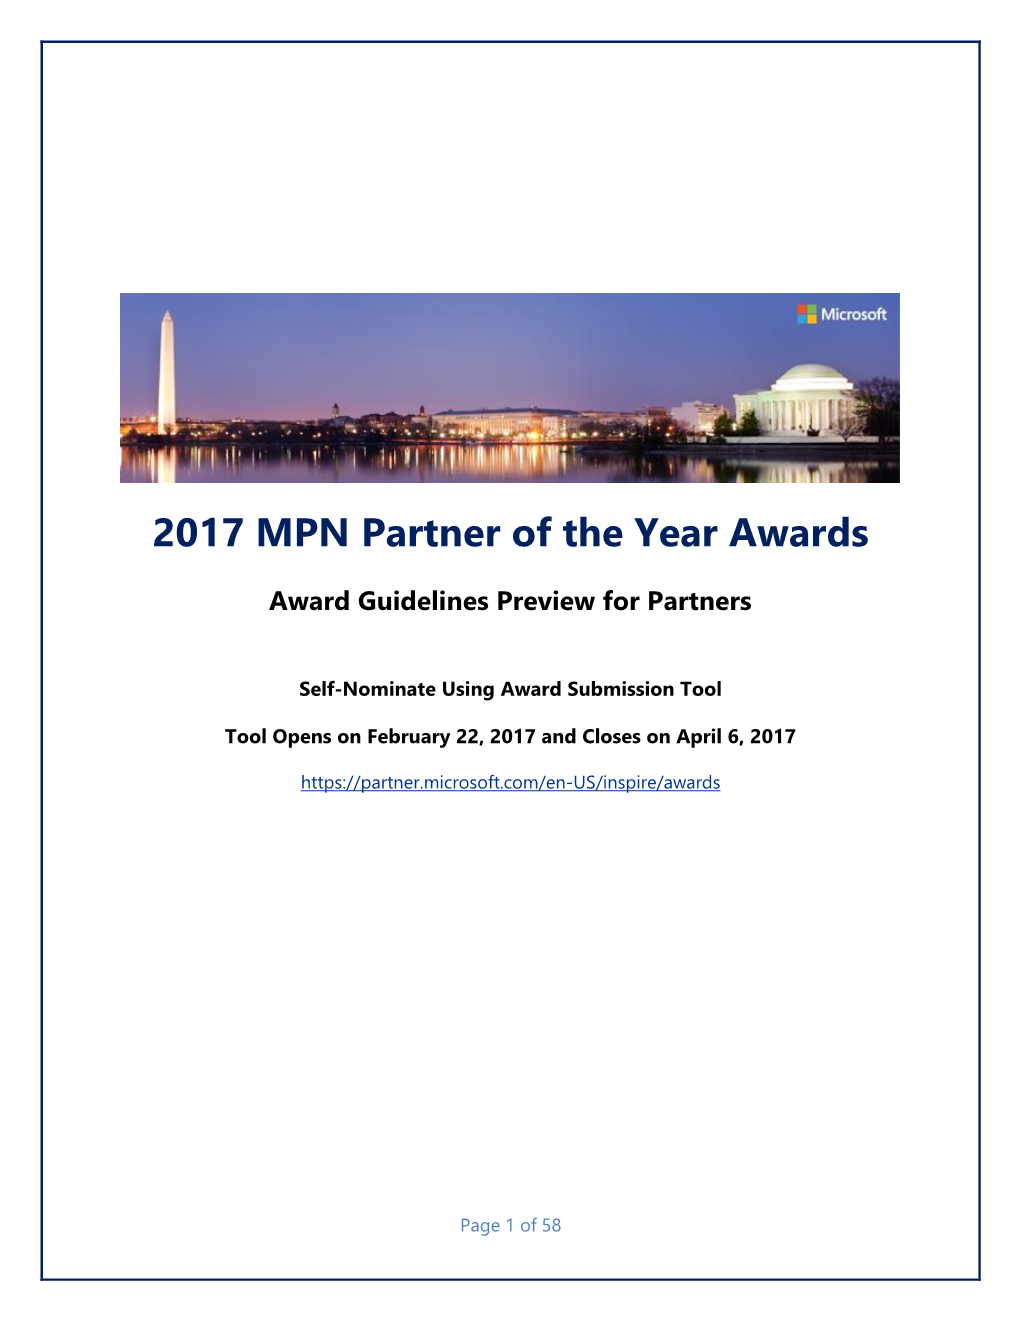 Partner of the Year Award Guidelines